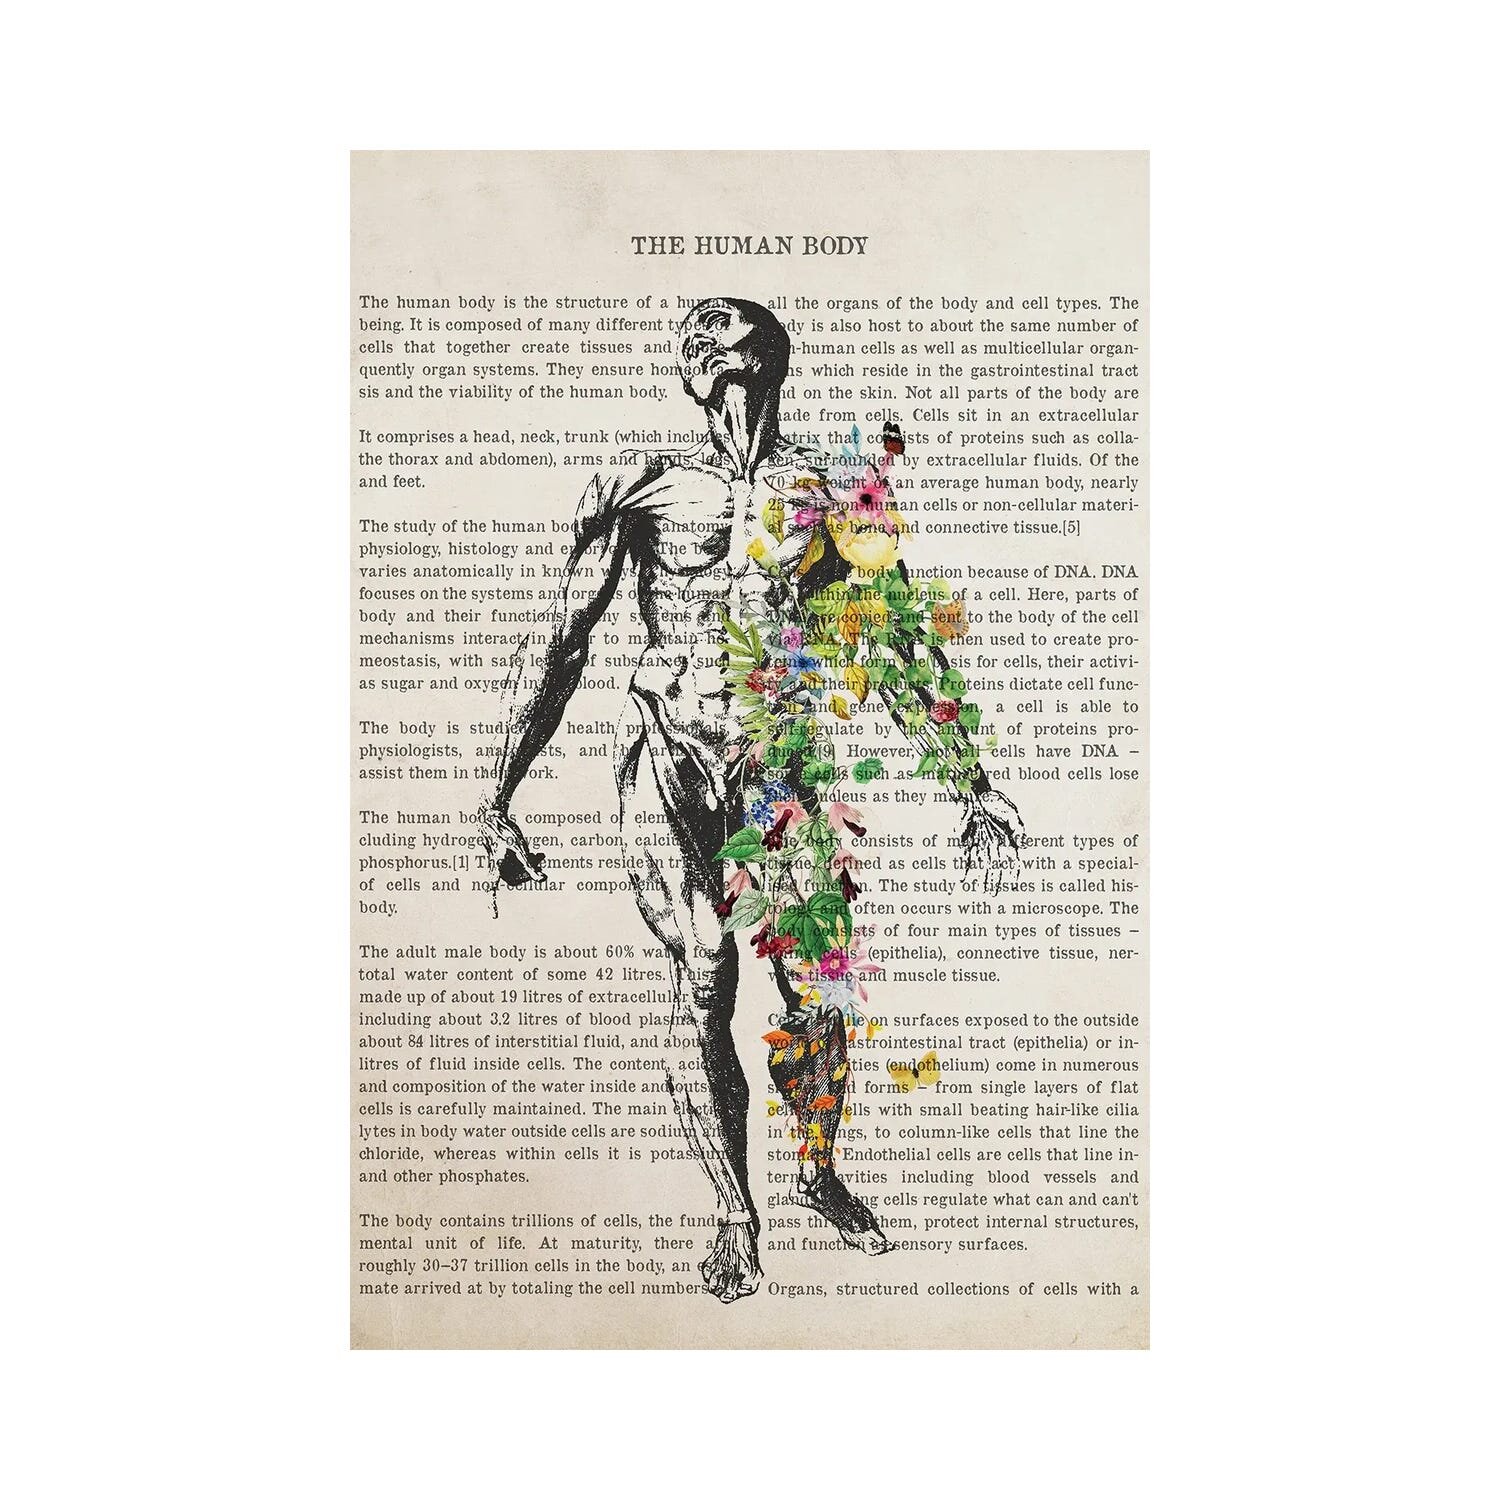 Human Body Anatomy Print - Wrapped Canvas Graphic Art East Urban Home Size: 18 H x 12 W x 1.5 D